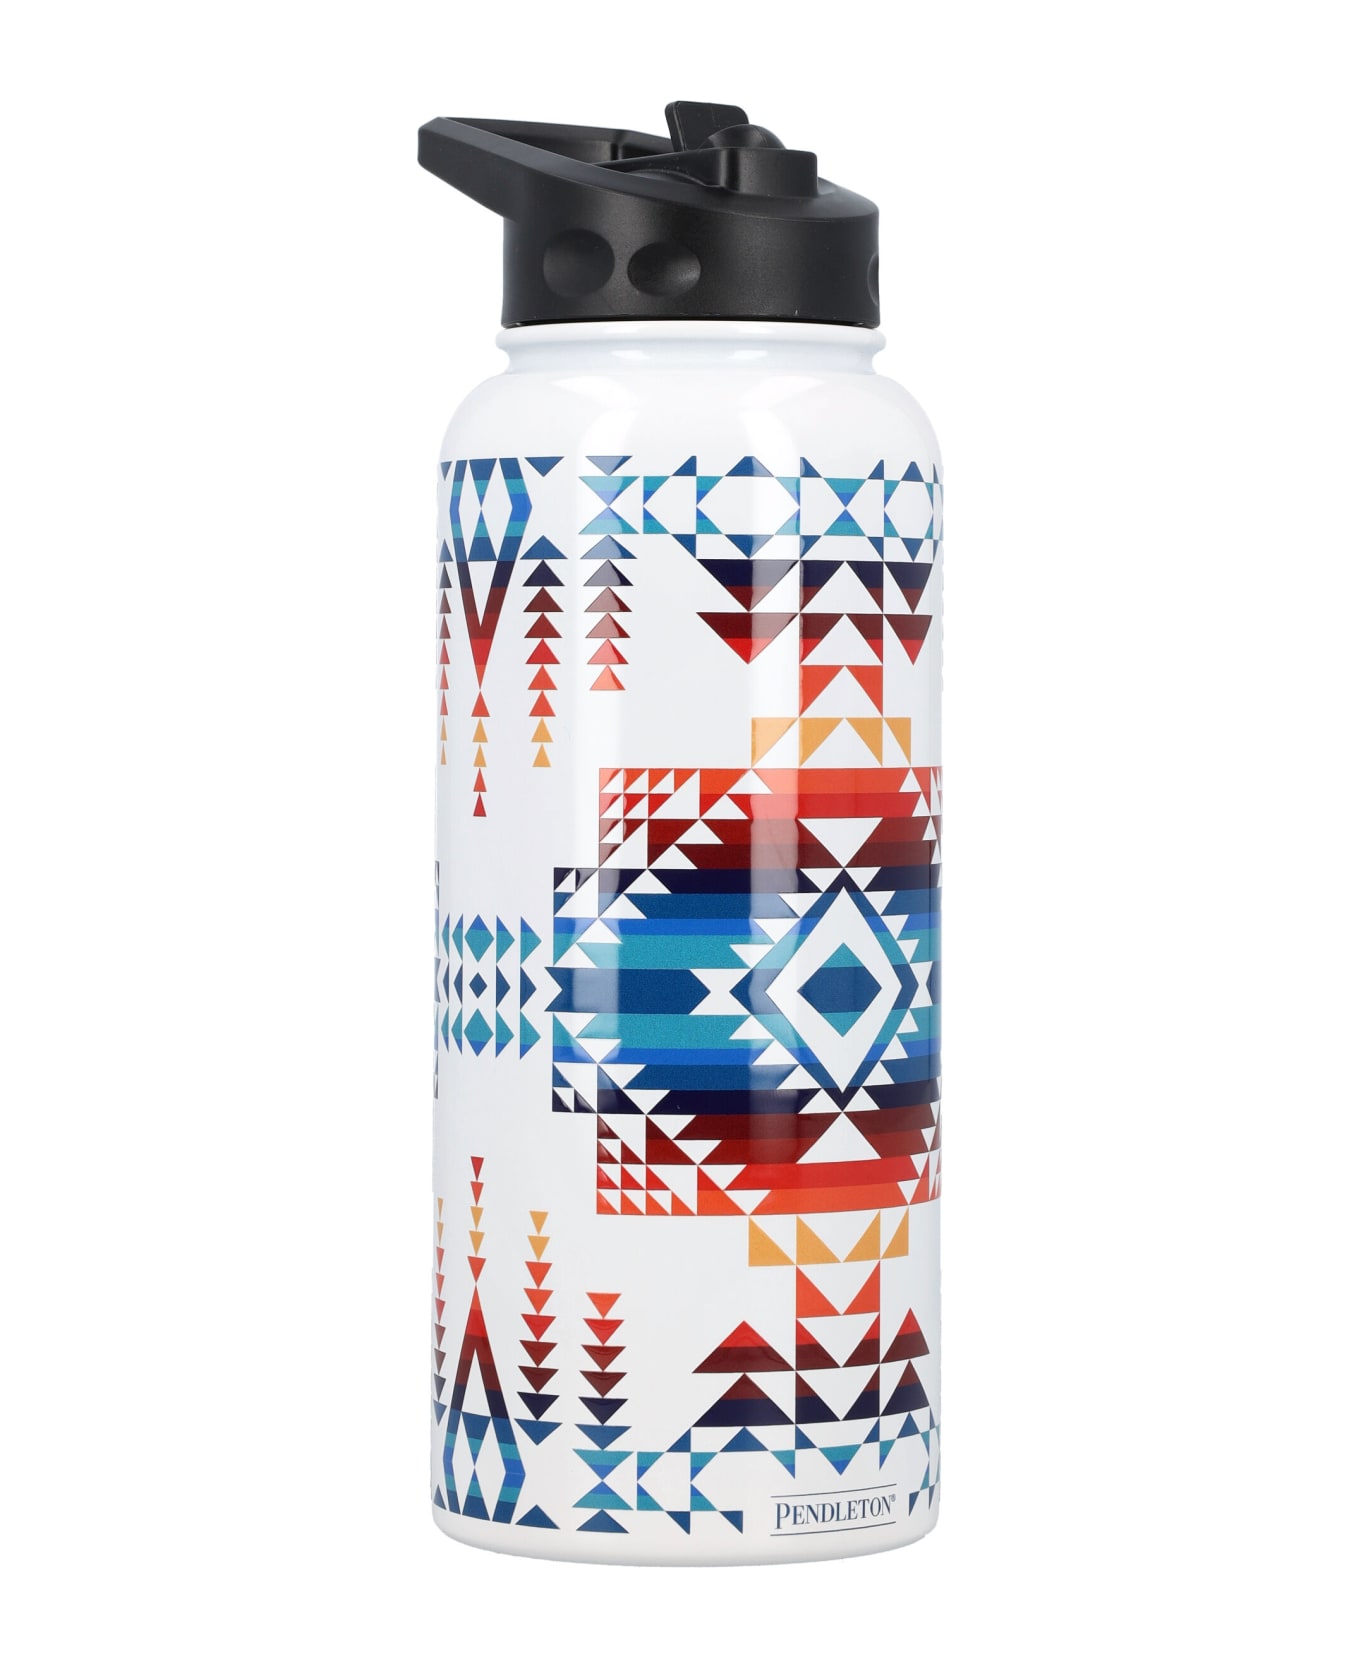 Pendleton Insulated 1l Bottle - Jacques Marie Mage